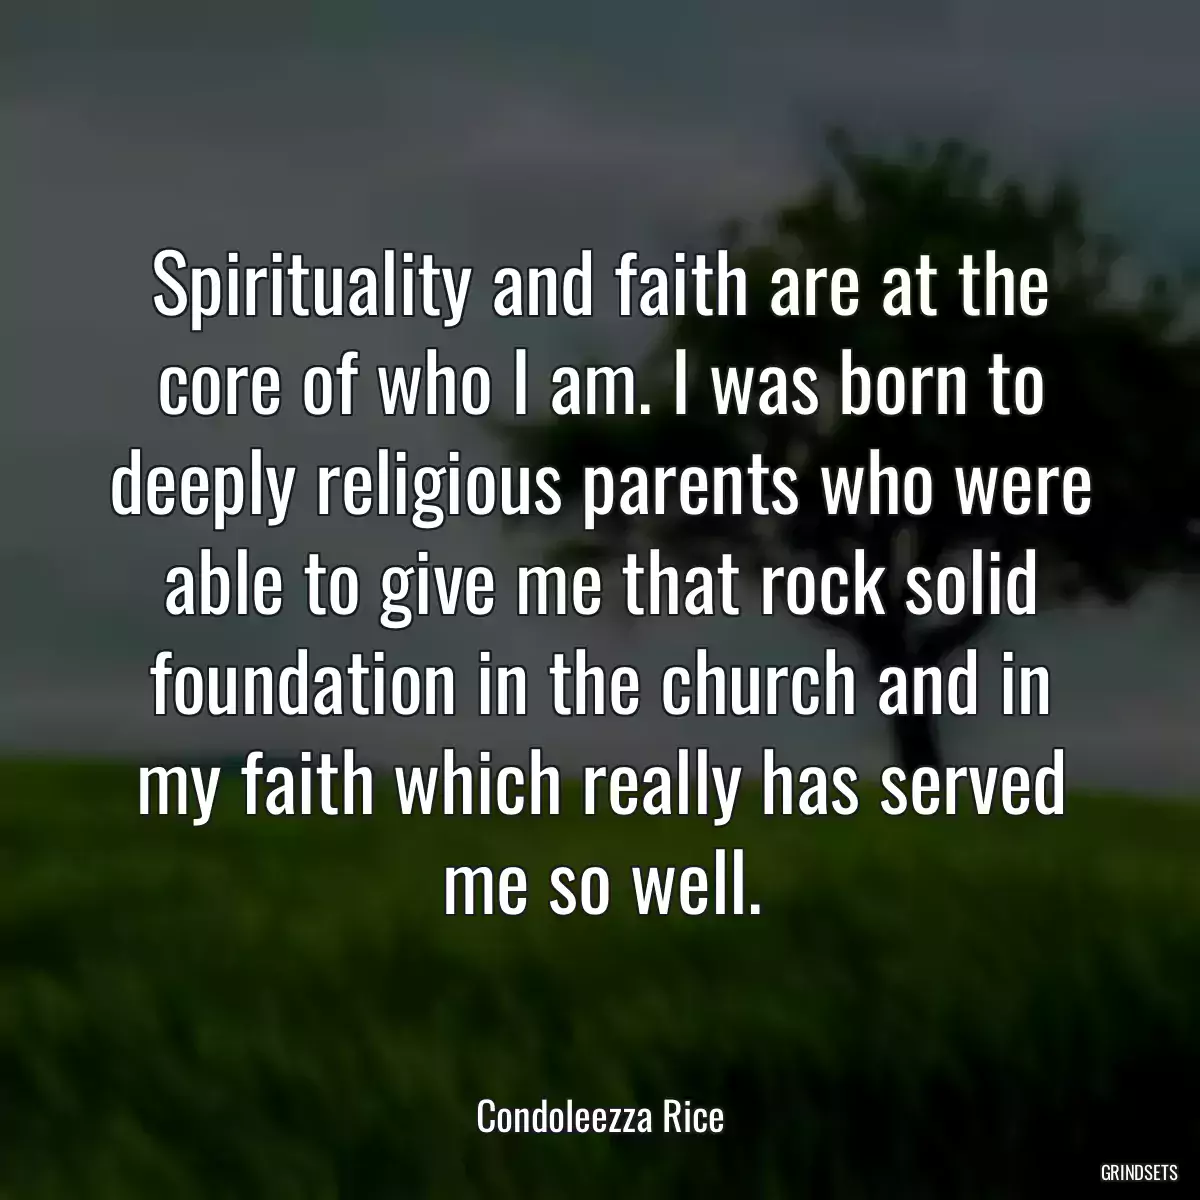 Spirituality and faith are at the core of who I am. I was born to deeply religious parents who were able to give me that rock solid foundation in the church and in my faith which really has served me so well.